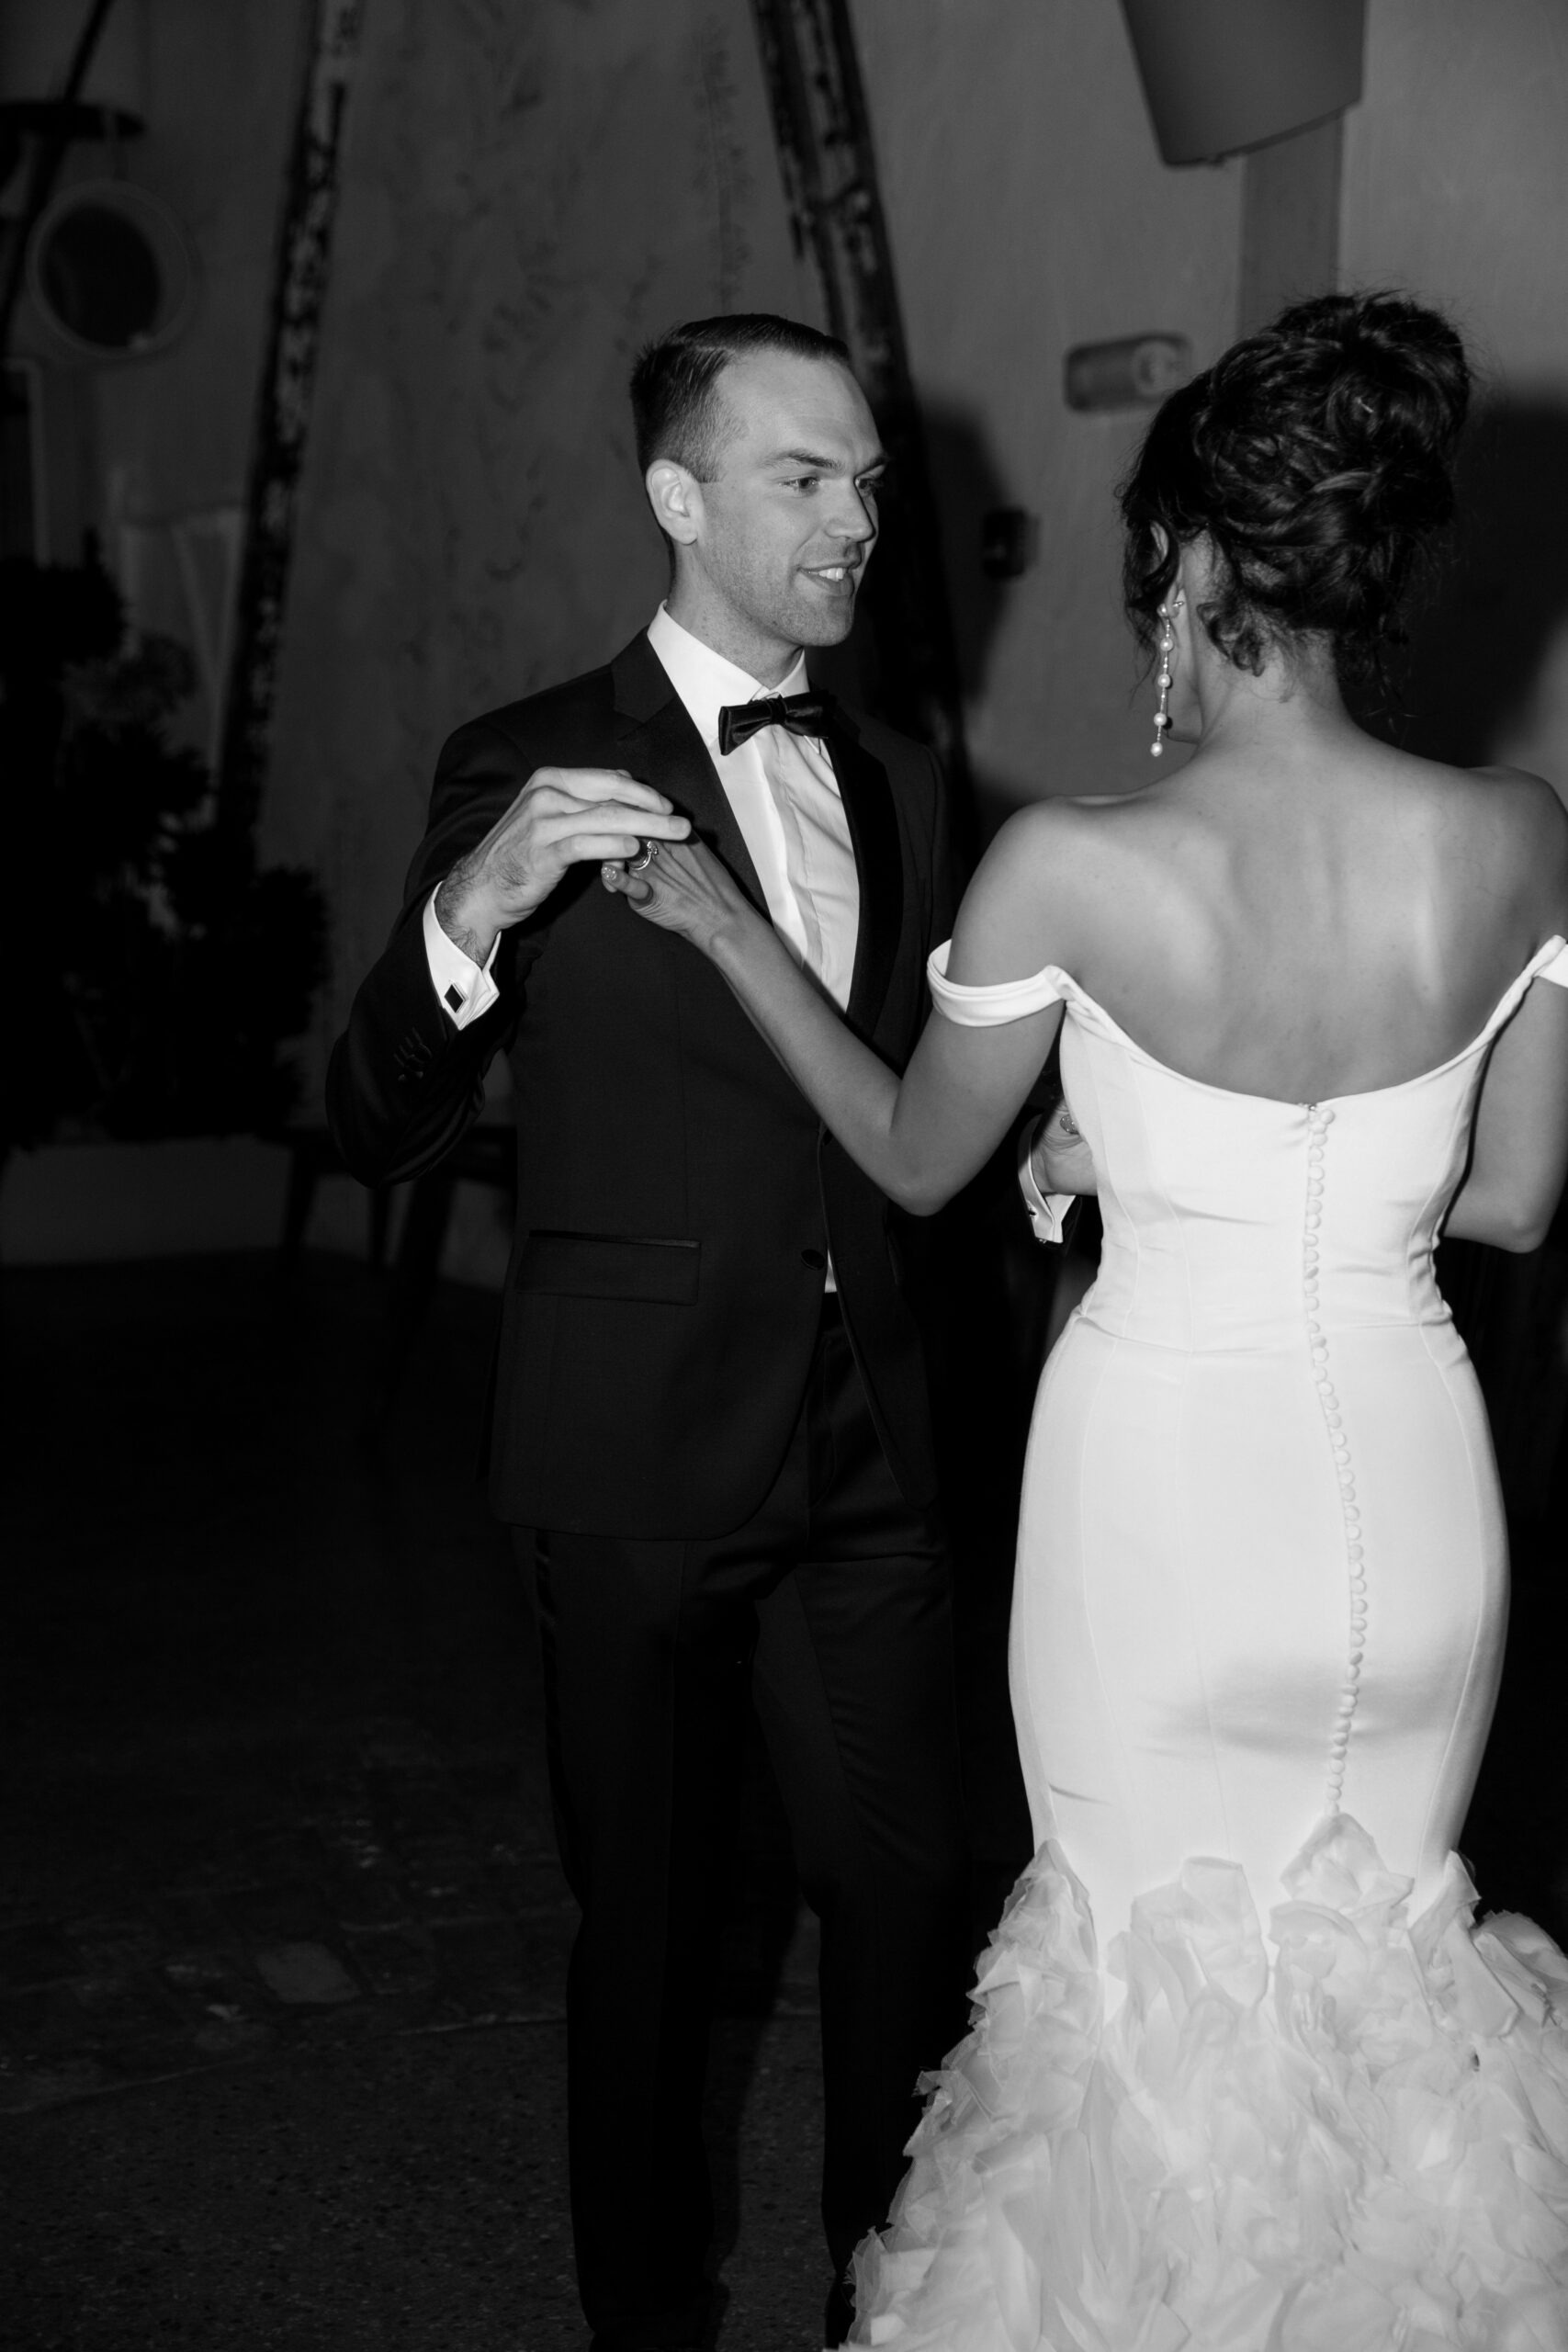 black and white cloesup direct flash portrait of groom about to twirl bride during their first dance